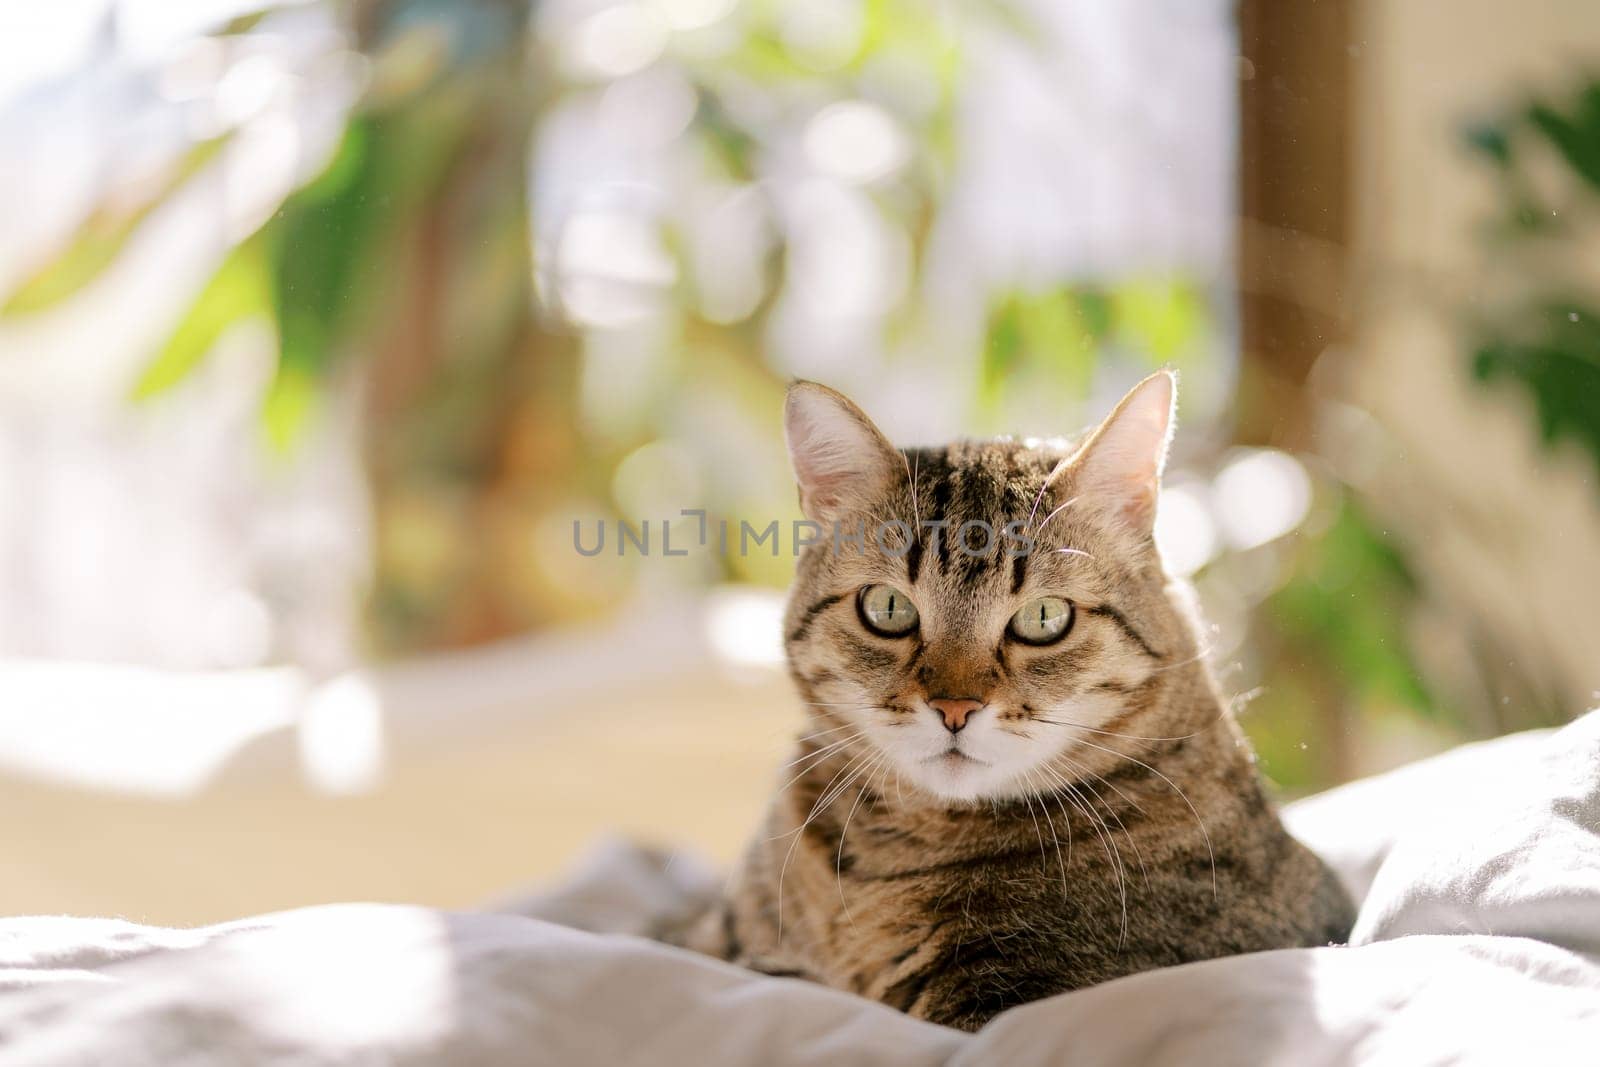 Tabby cat lies on a bed near among the pillows by Nadtochiy